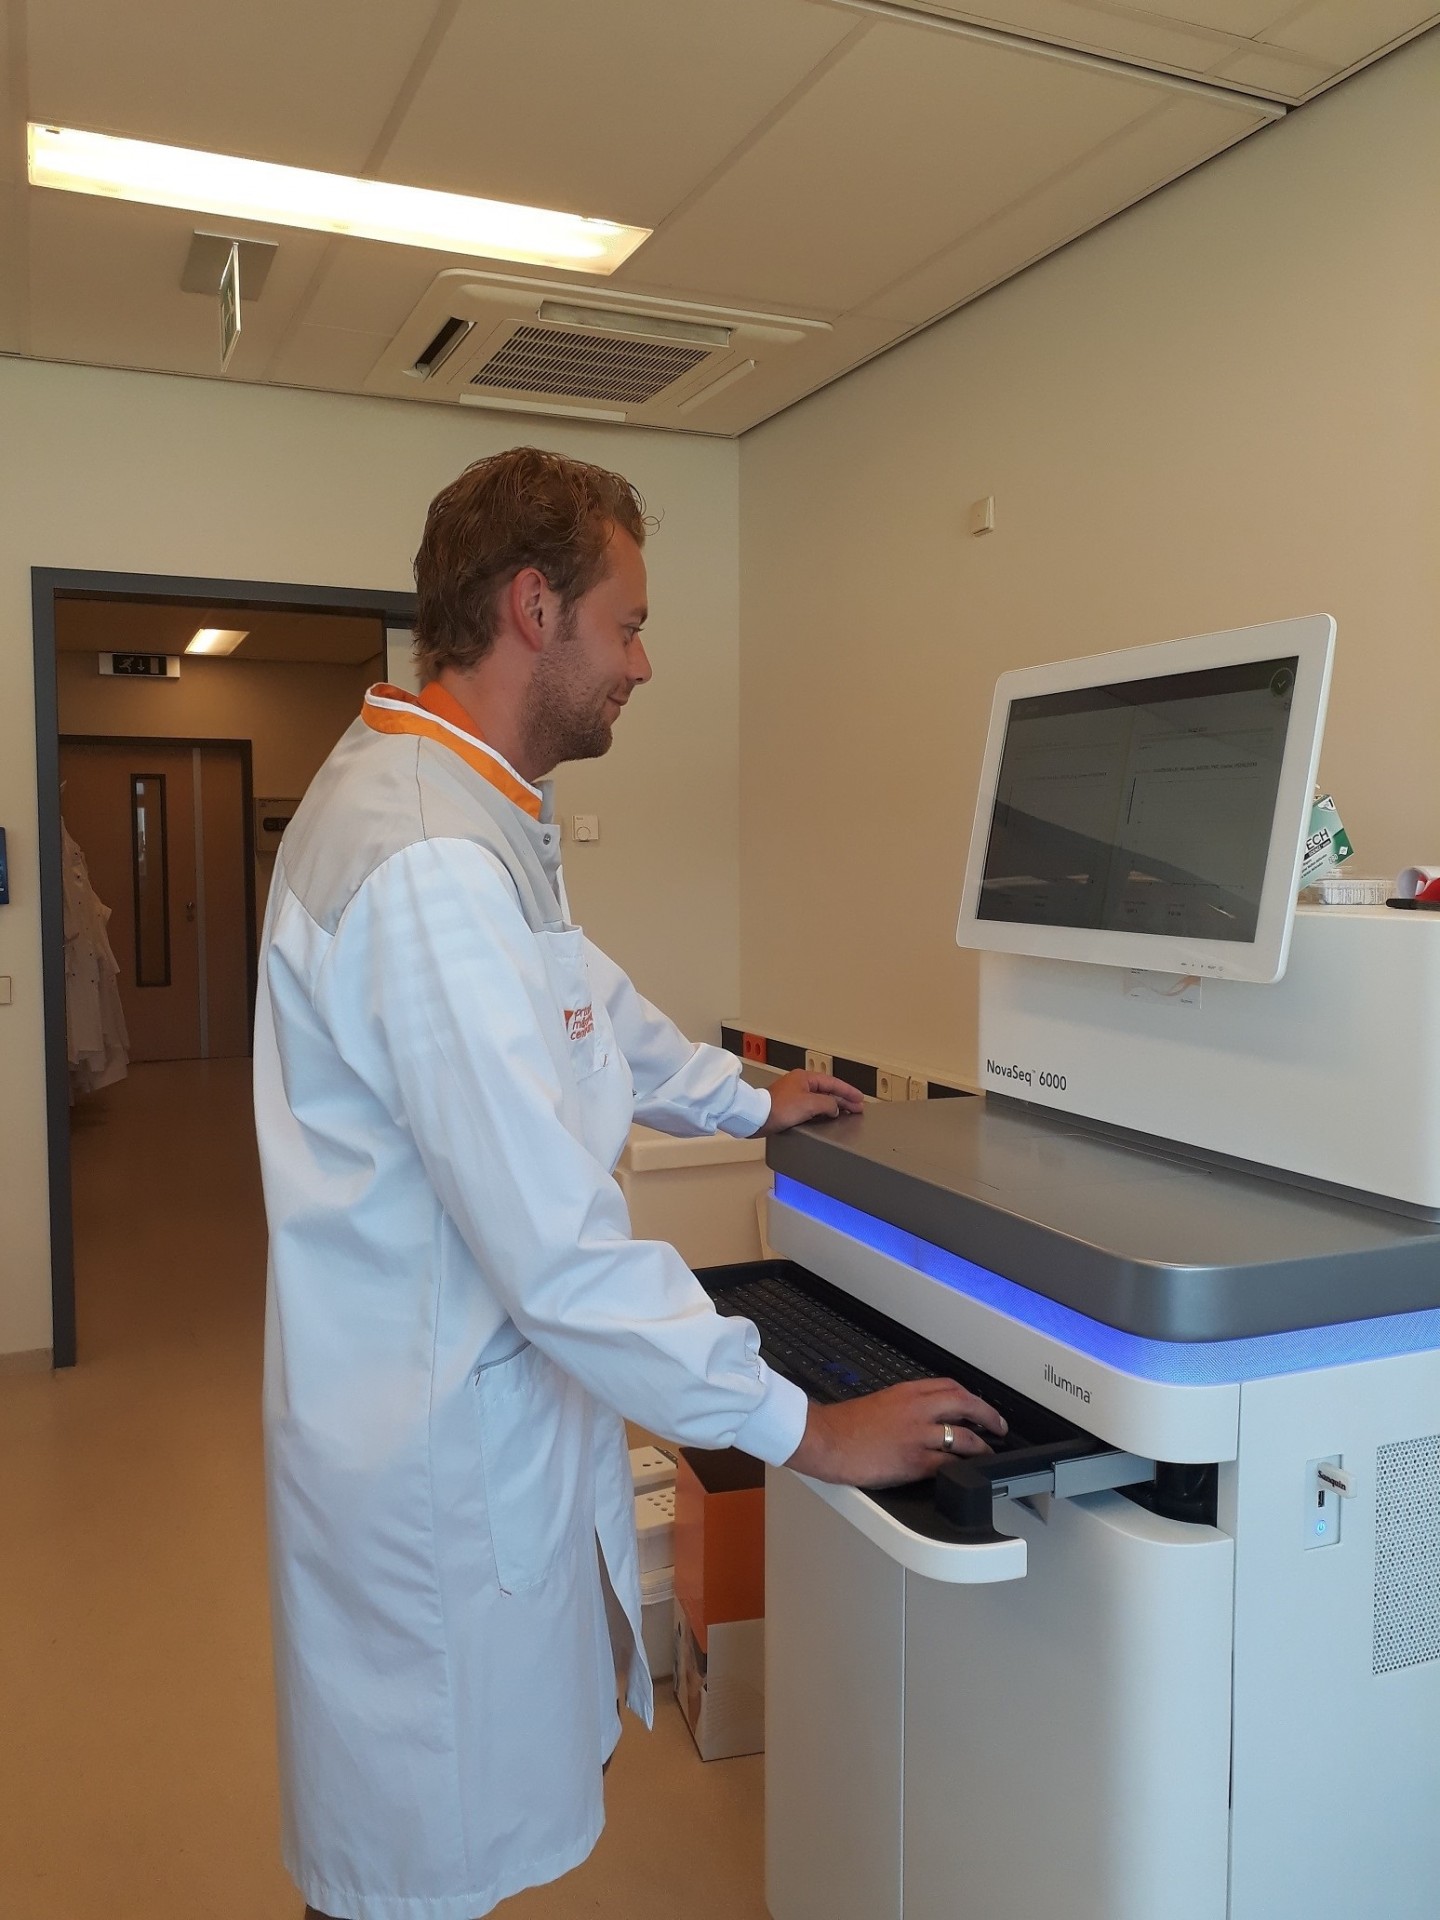 First DNA samples are loaded into the NovaSeq 6000 by research technician Marc van Tuil